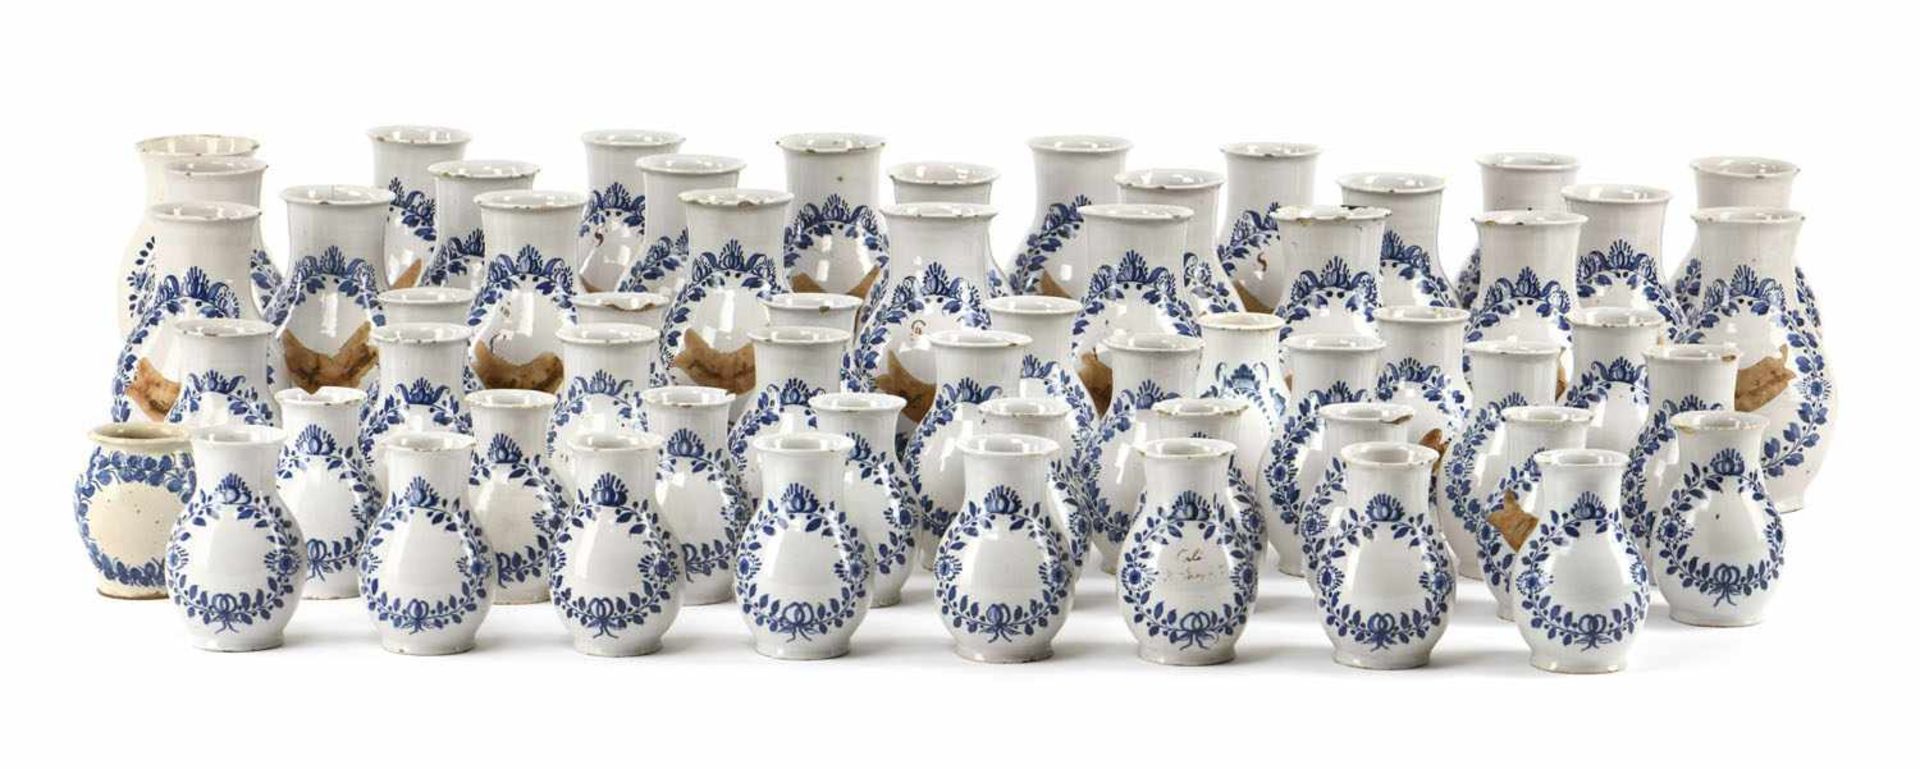 A COLLECTION OF 55 BLUE AND WHITE FAYENCE PHARMACY JARS, Nuremberg, middle of 18th century. Blue